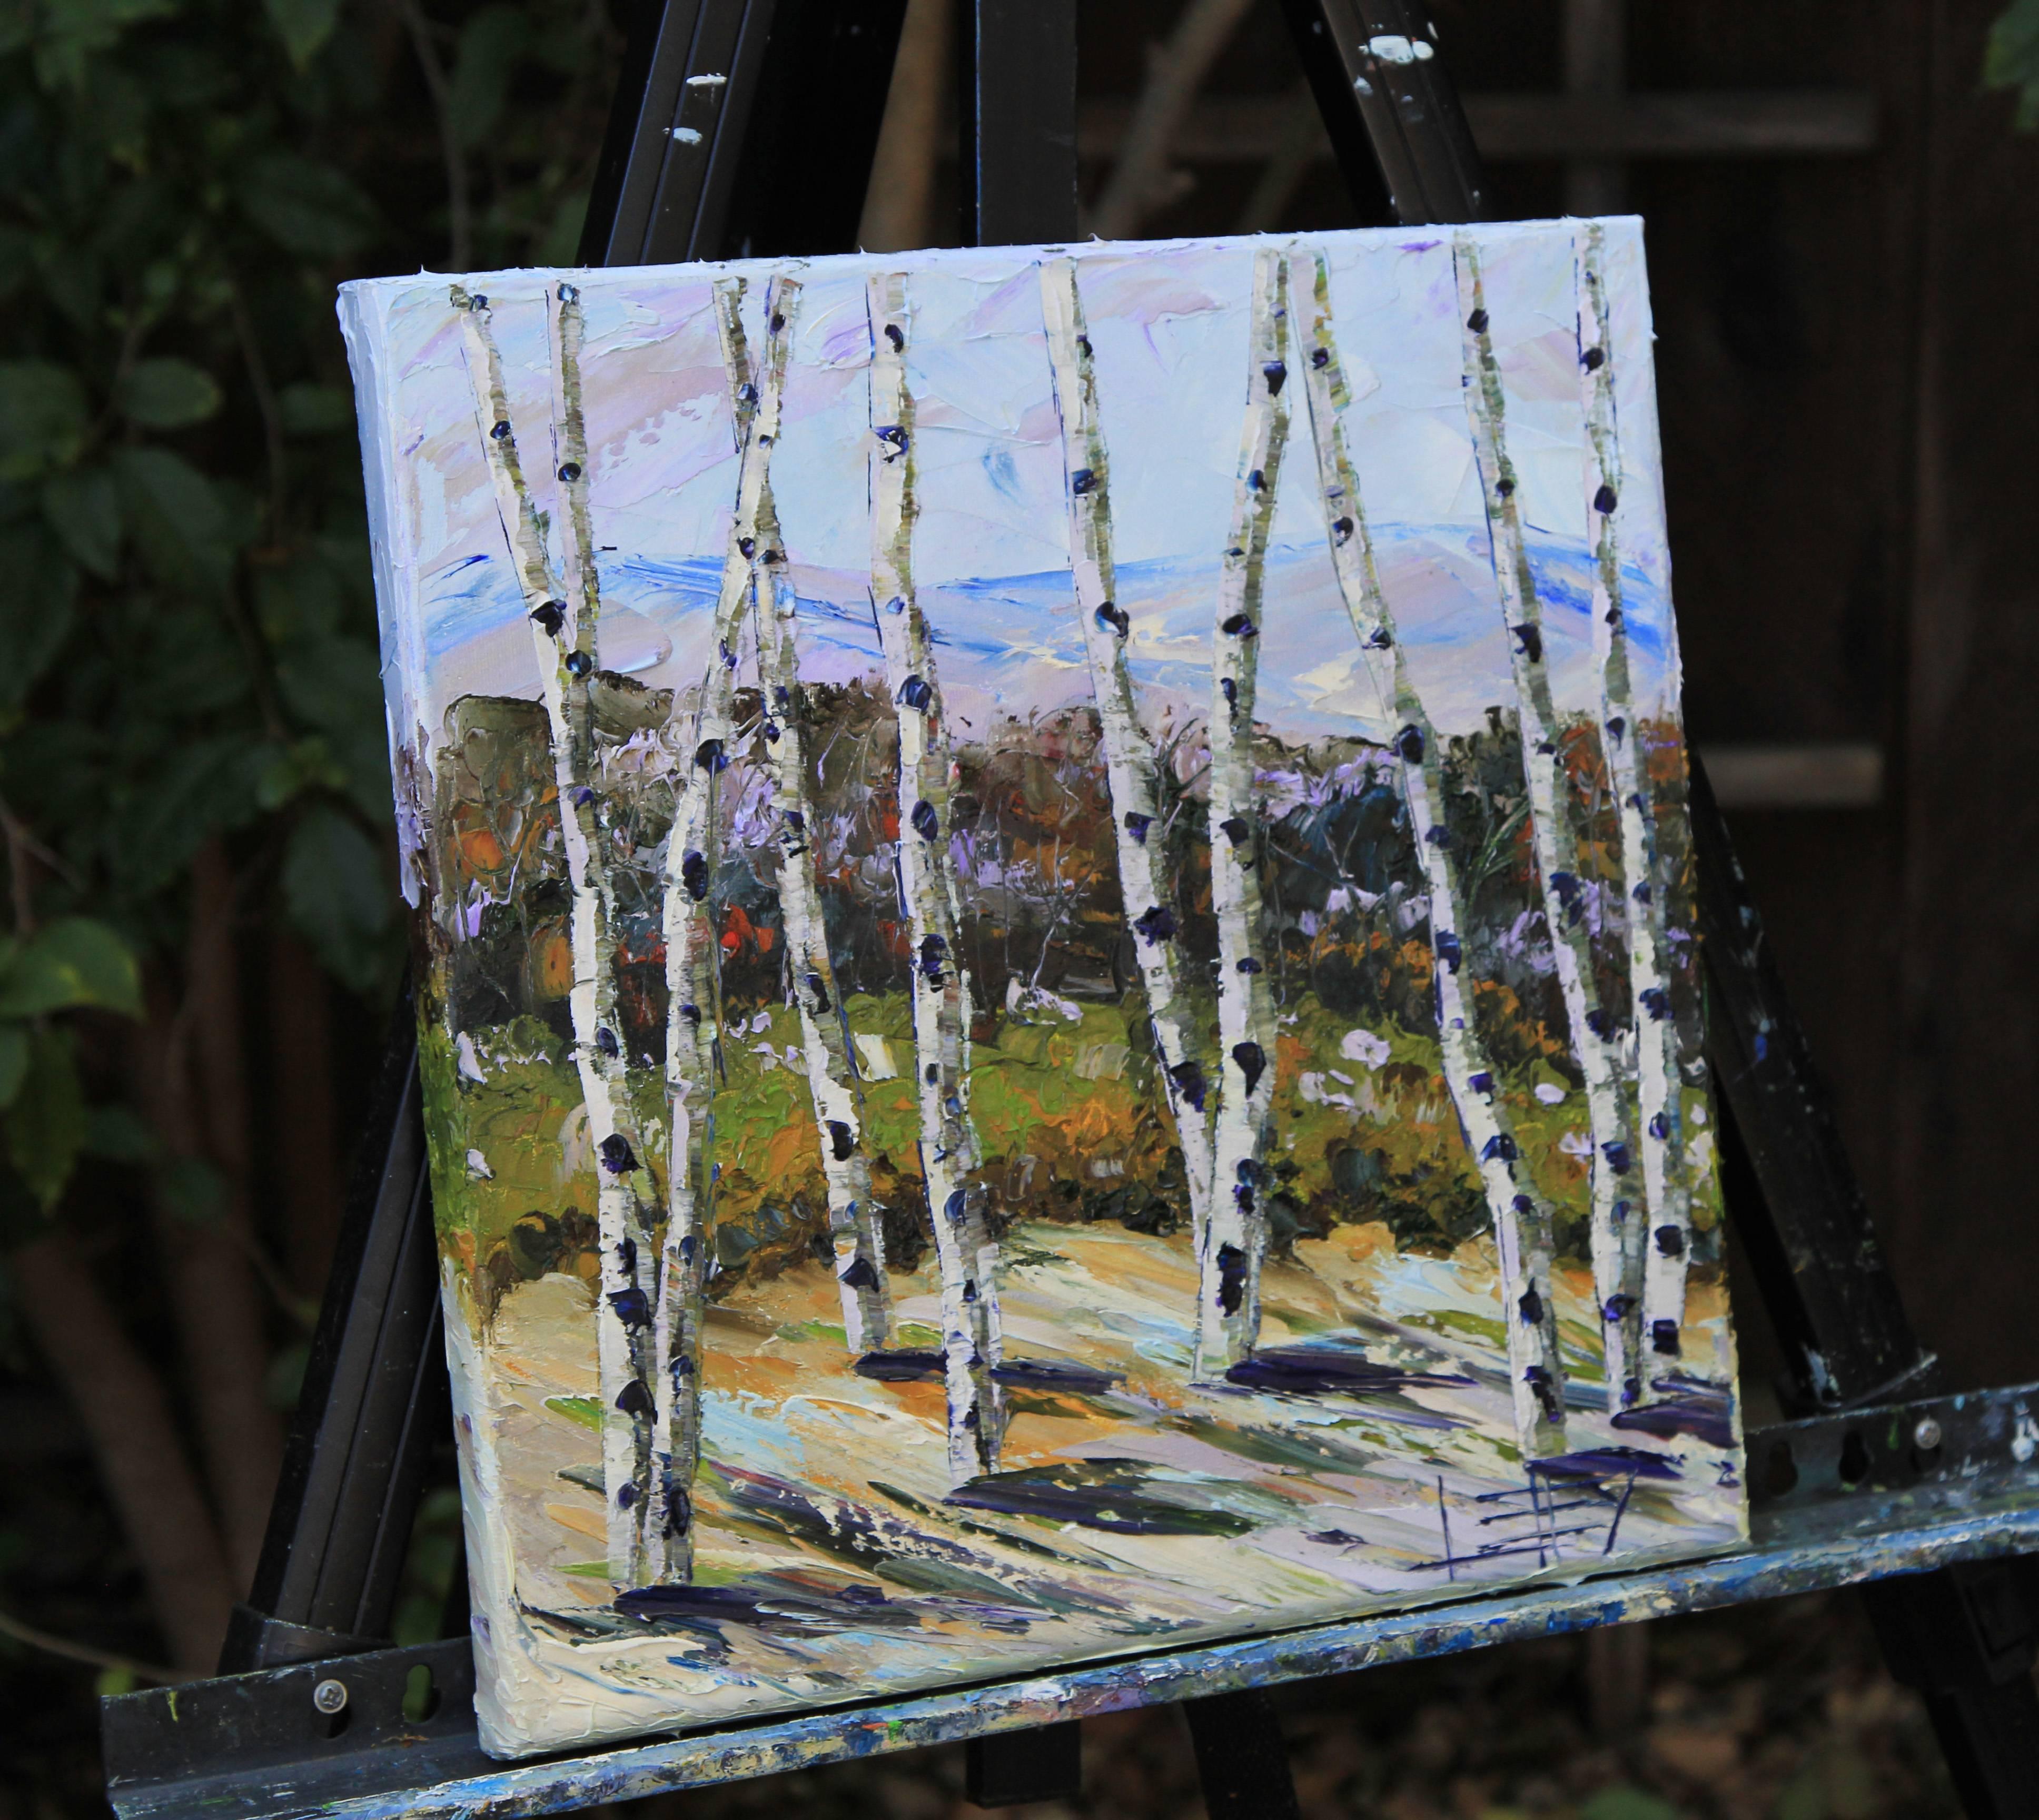 Birch Eloquence Lisa Elley Oil painting on stretched canvas
One-of-a-kind
Signed on front and back
2016
12 in. h x 12 in. w x .75 in. d
0 lbs. 8 oz. Artist Comments 
My favorite season of fall is captured here by my favorite tools, my palette